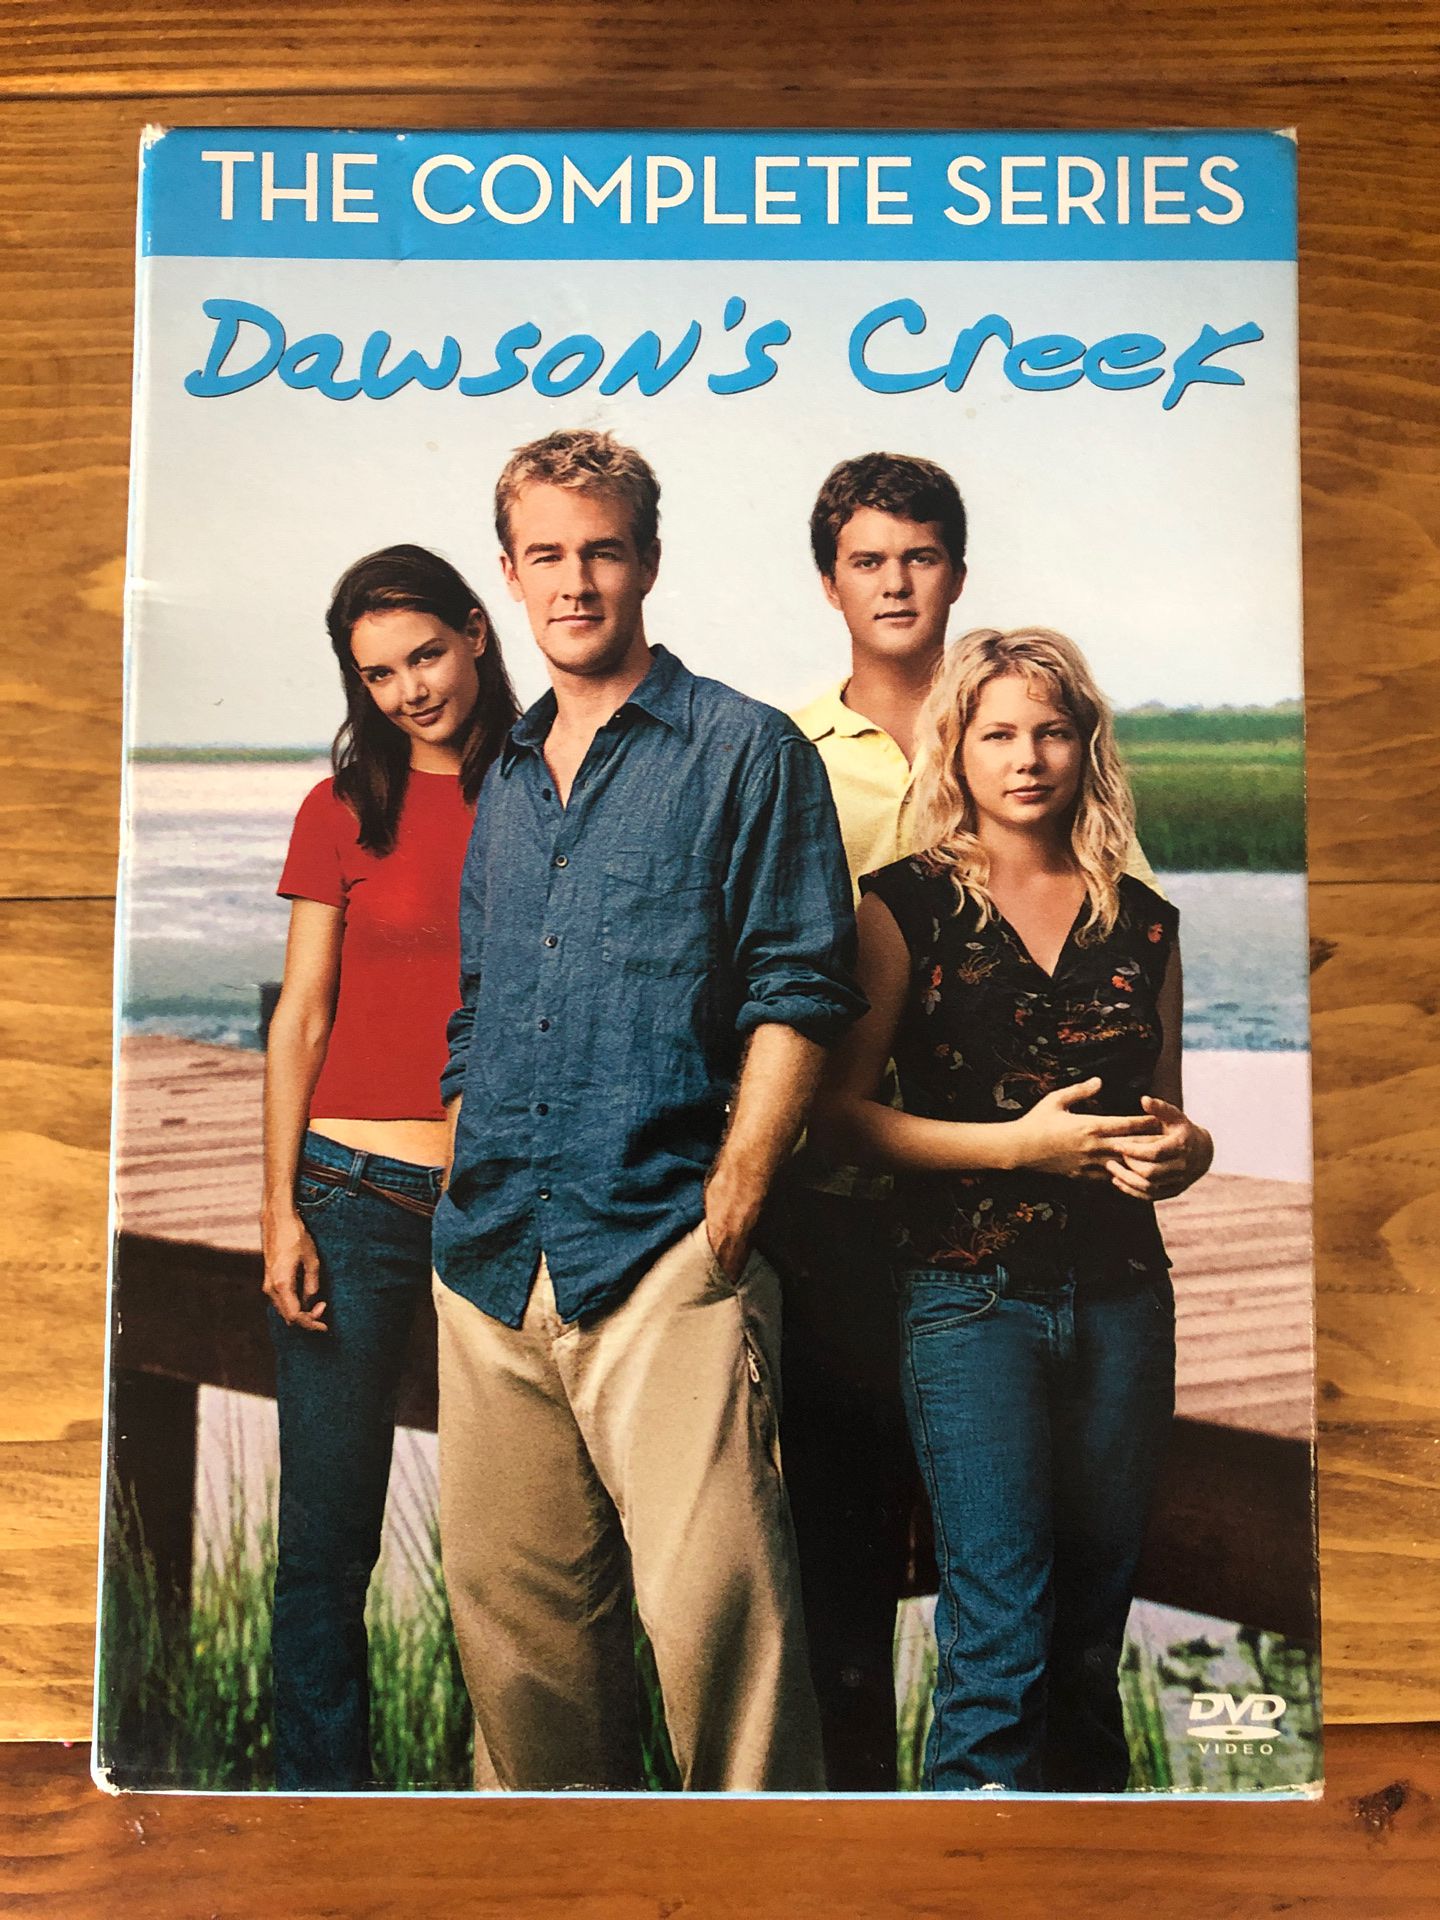 The complete series of Dawson’s creek